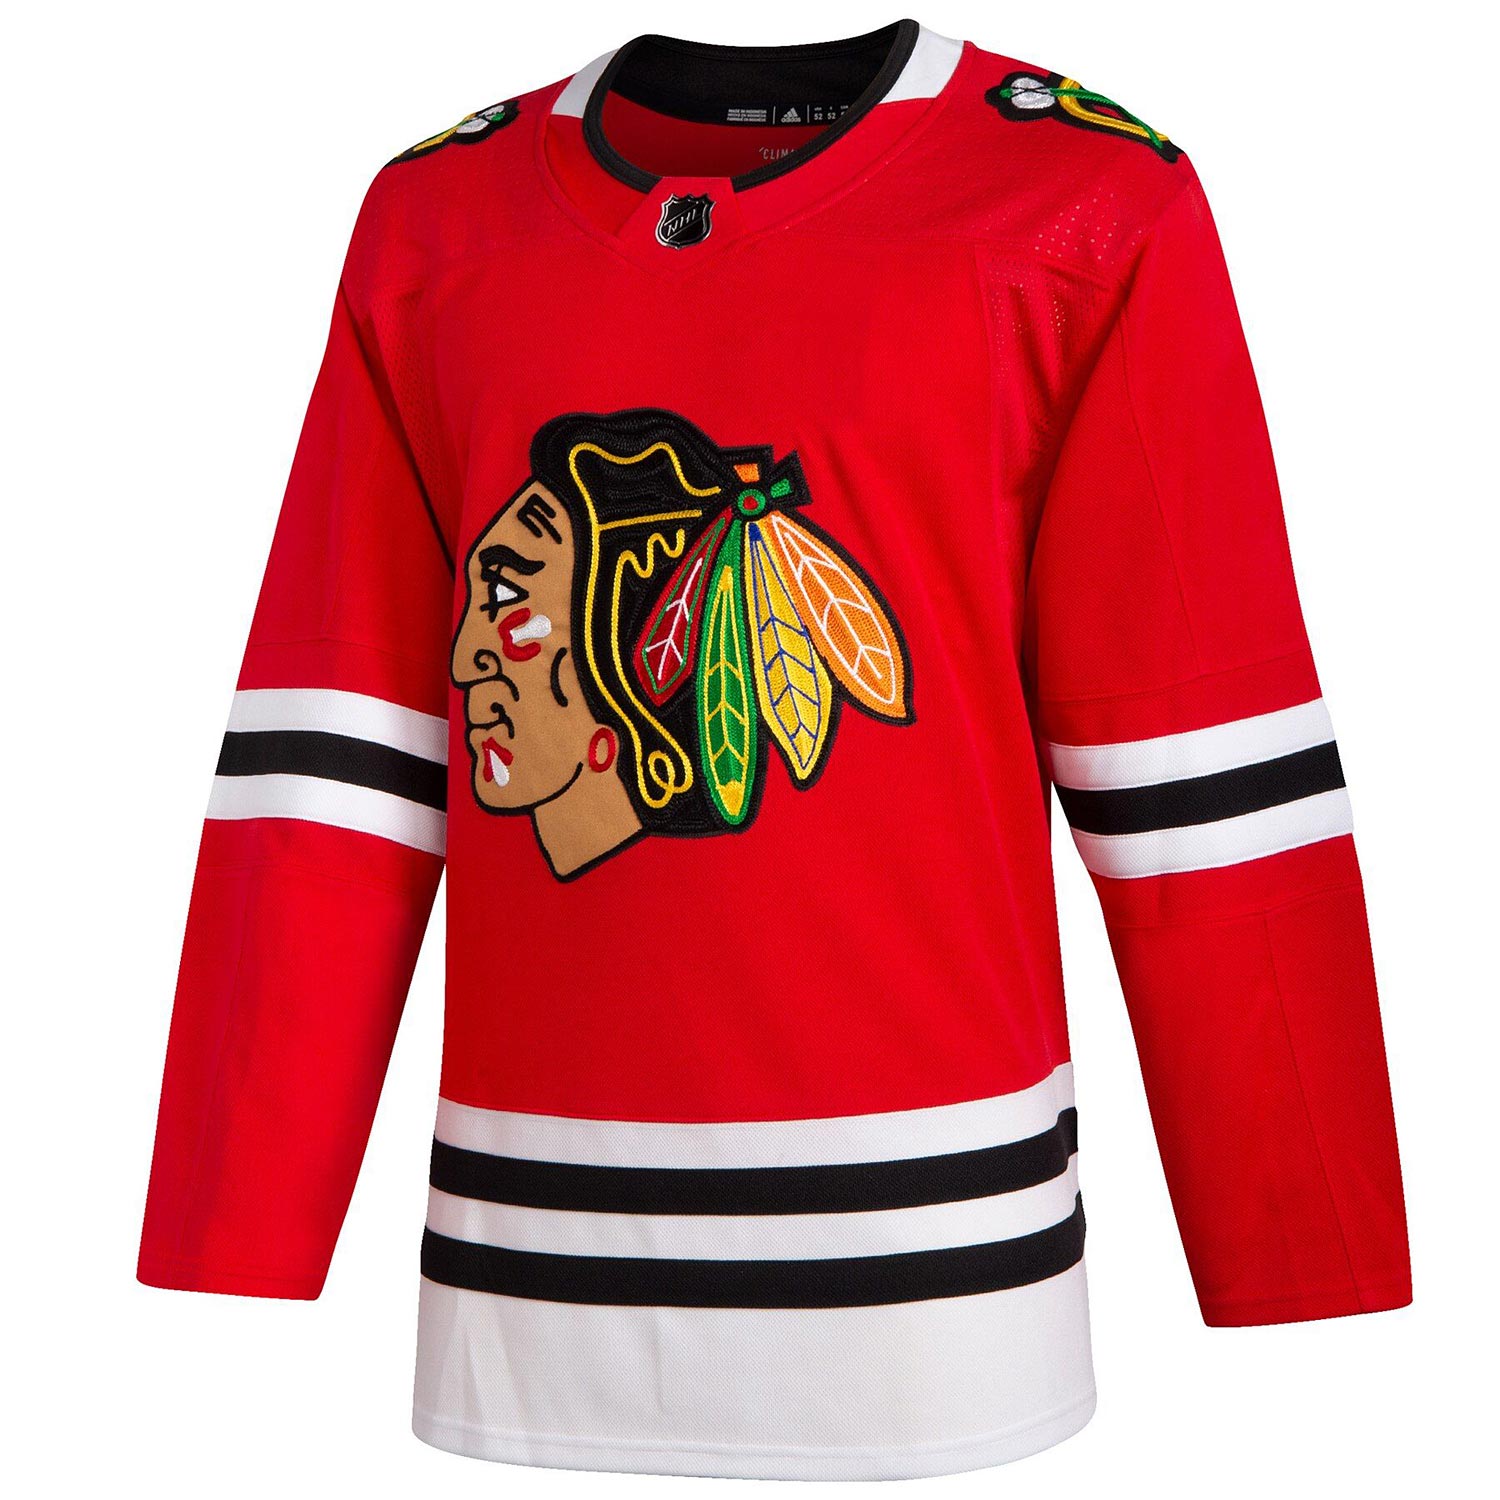 The front of a red authentic Chicago Blackhawks jersey for sale at Gunzo's in Chicago